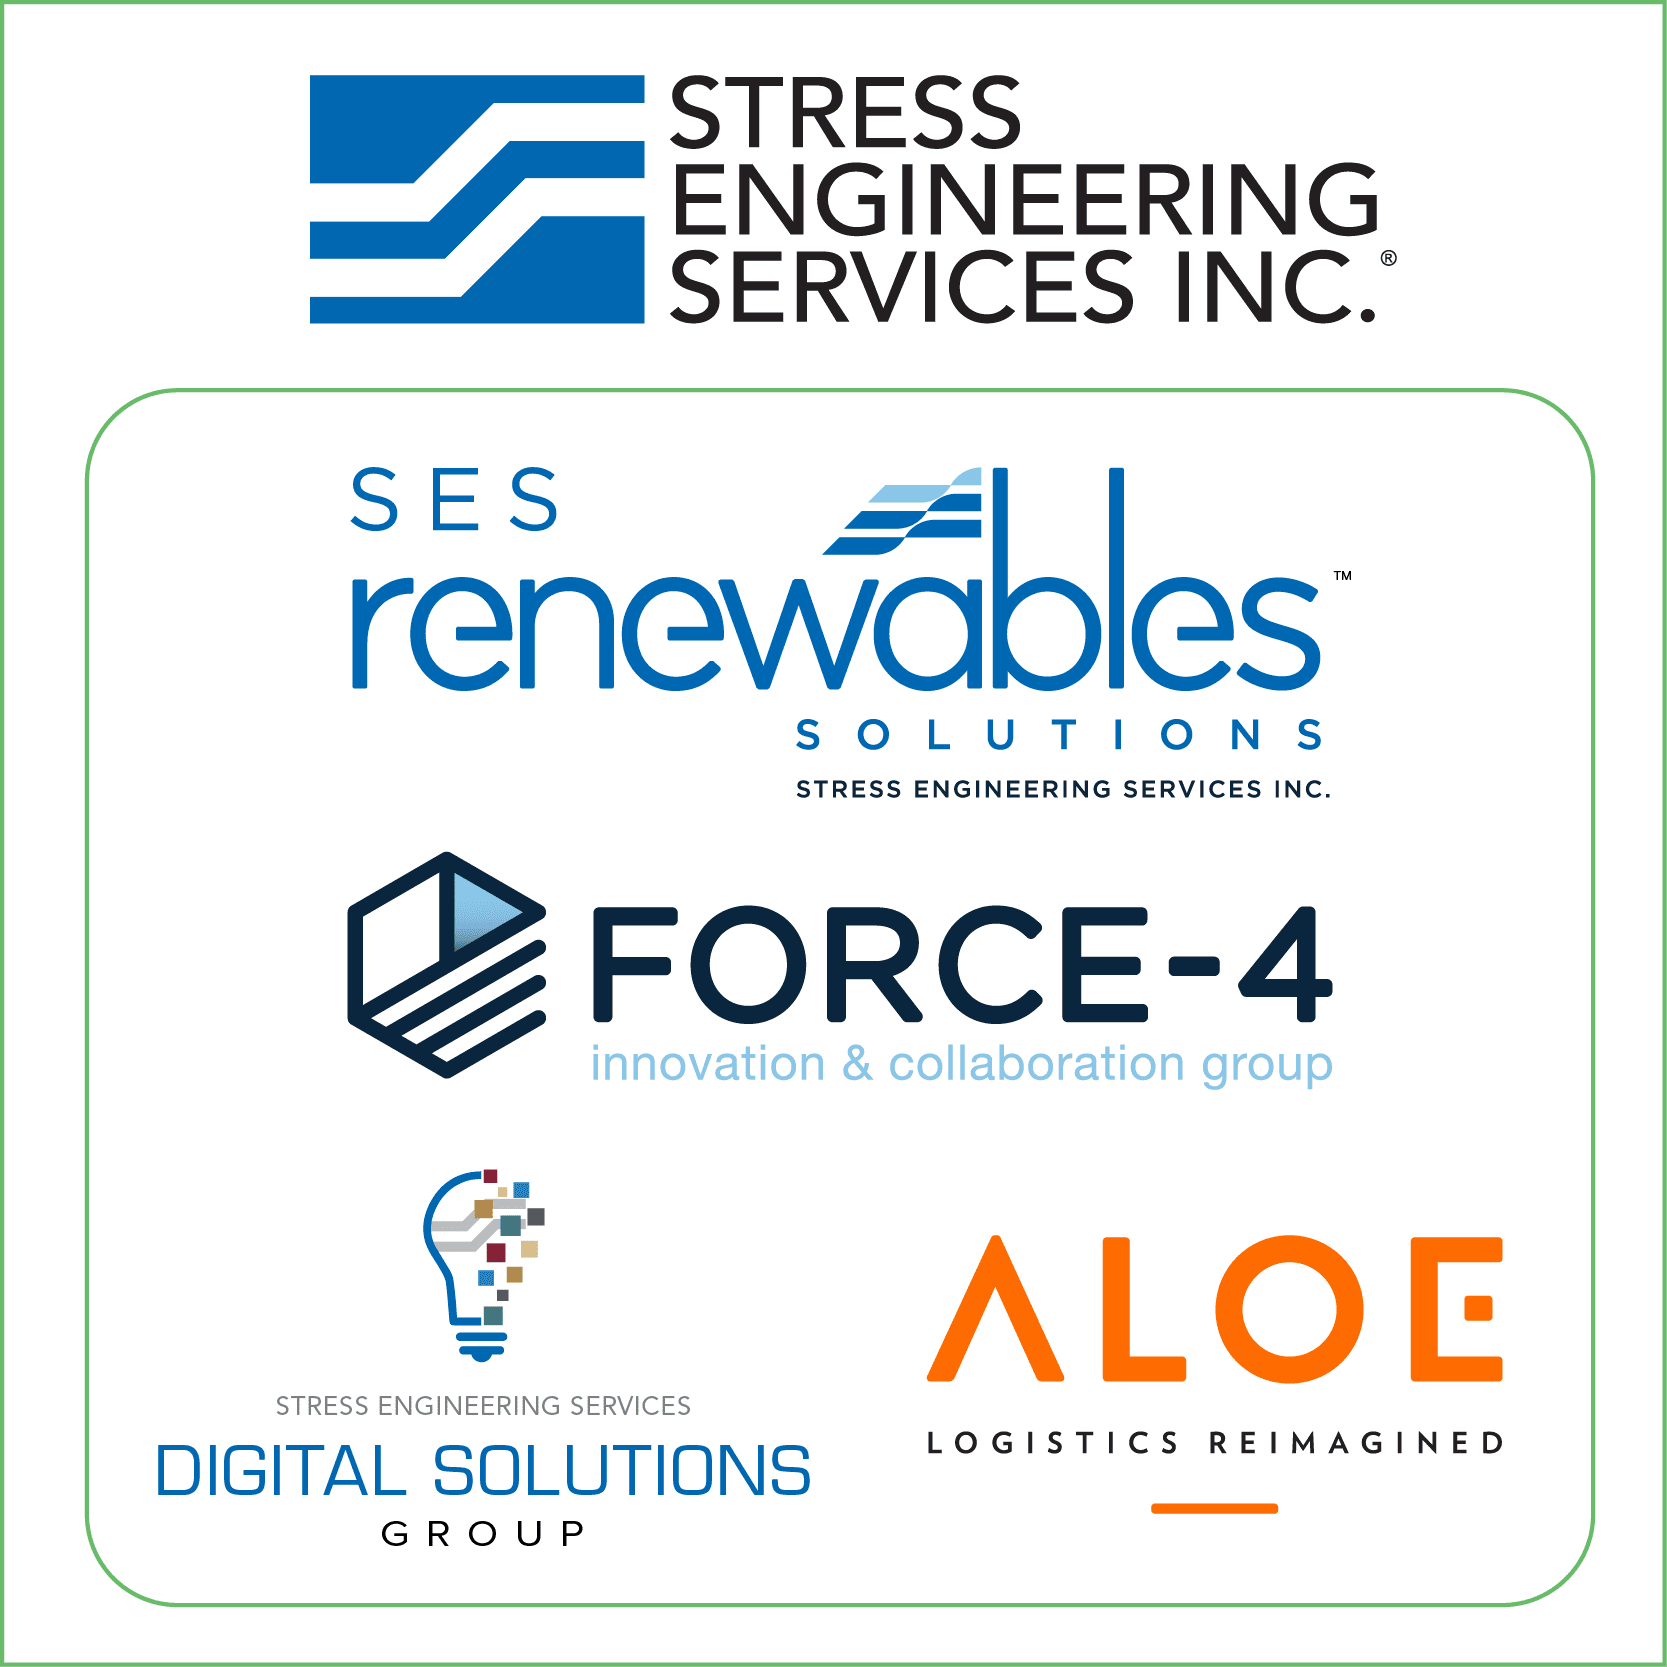 Stress Engineering Services Family of logos